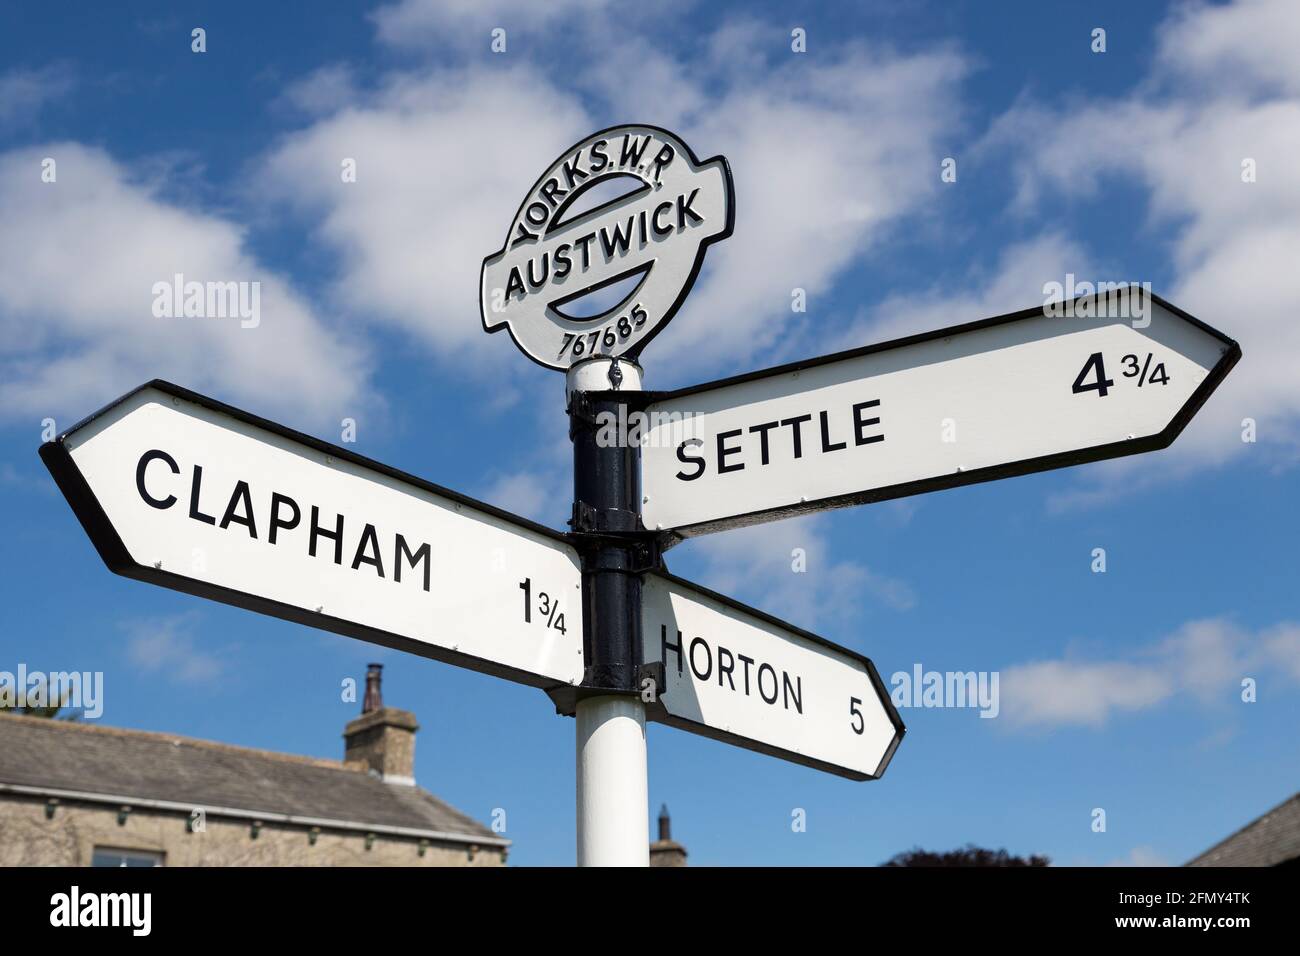 Signpost pointing to Clapham, Settle and Horton in Austwick, Yorkshire, UK Stock Photo